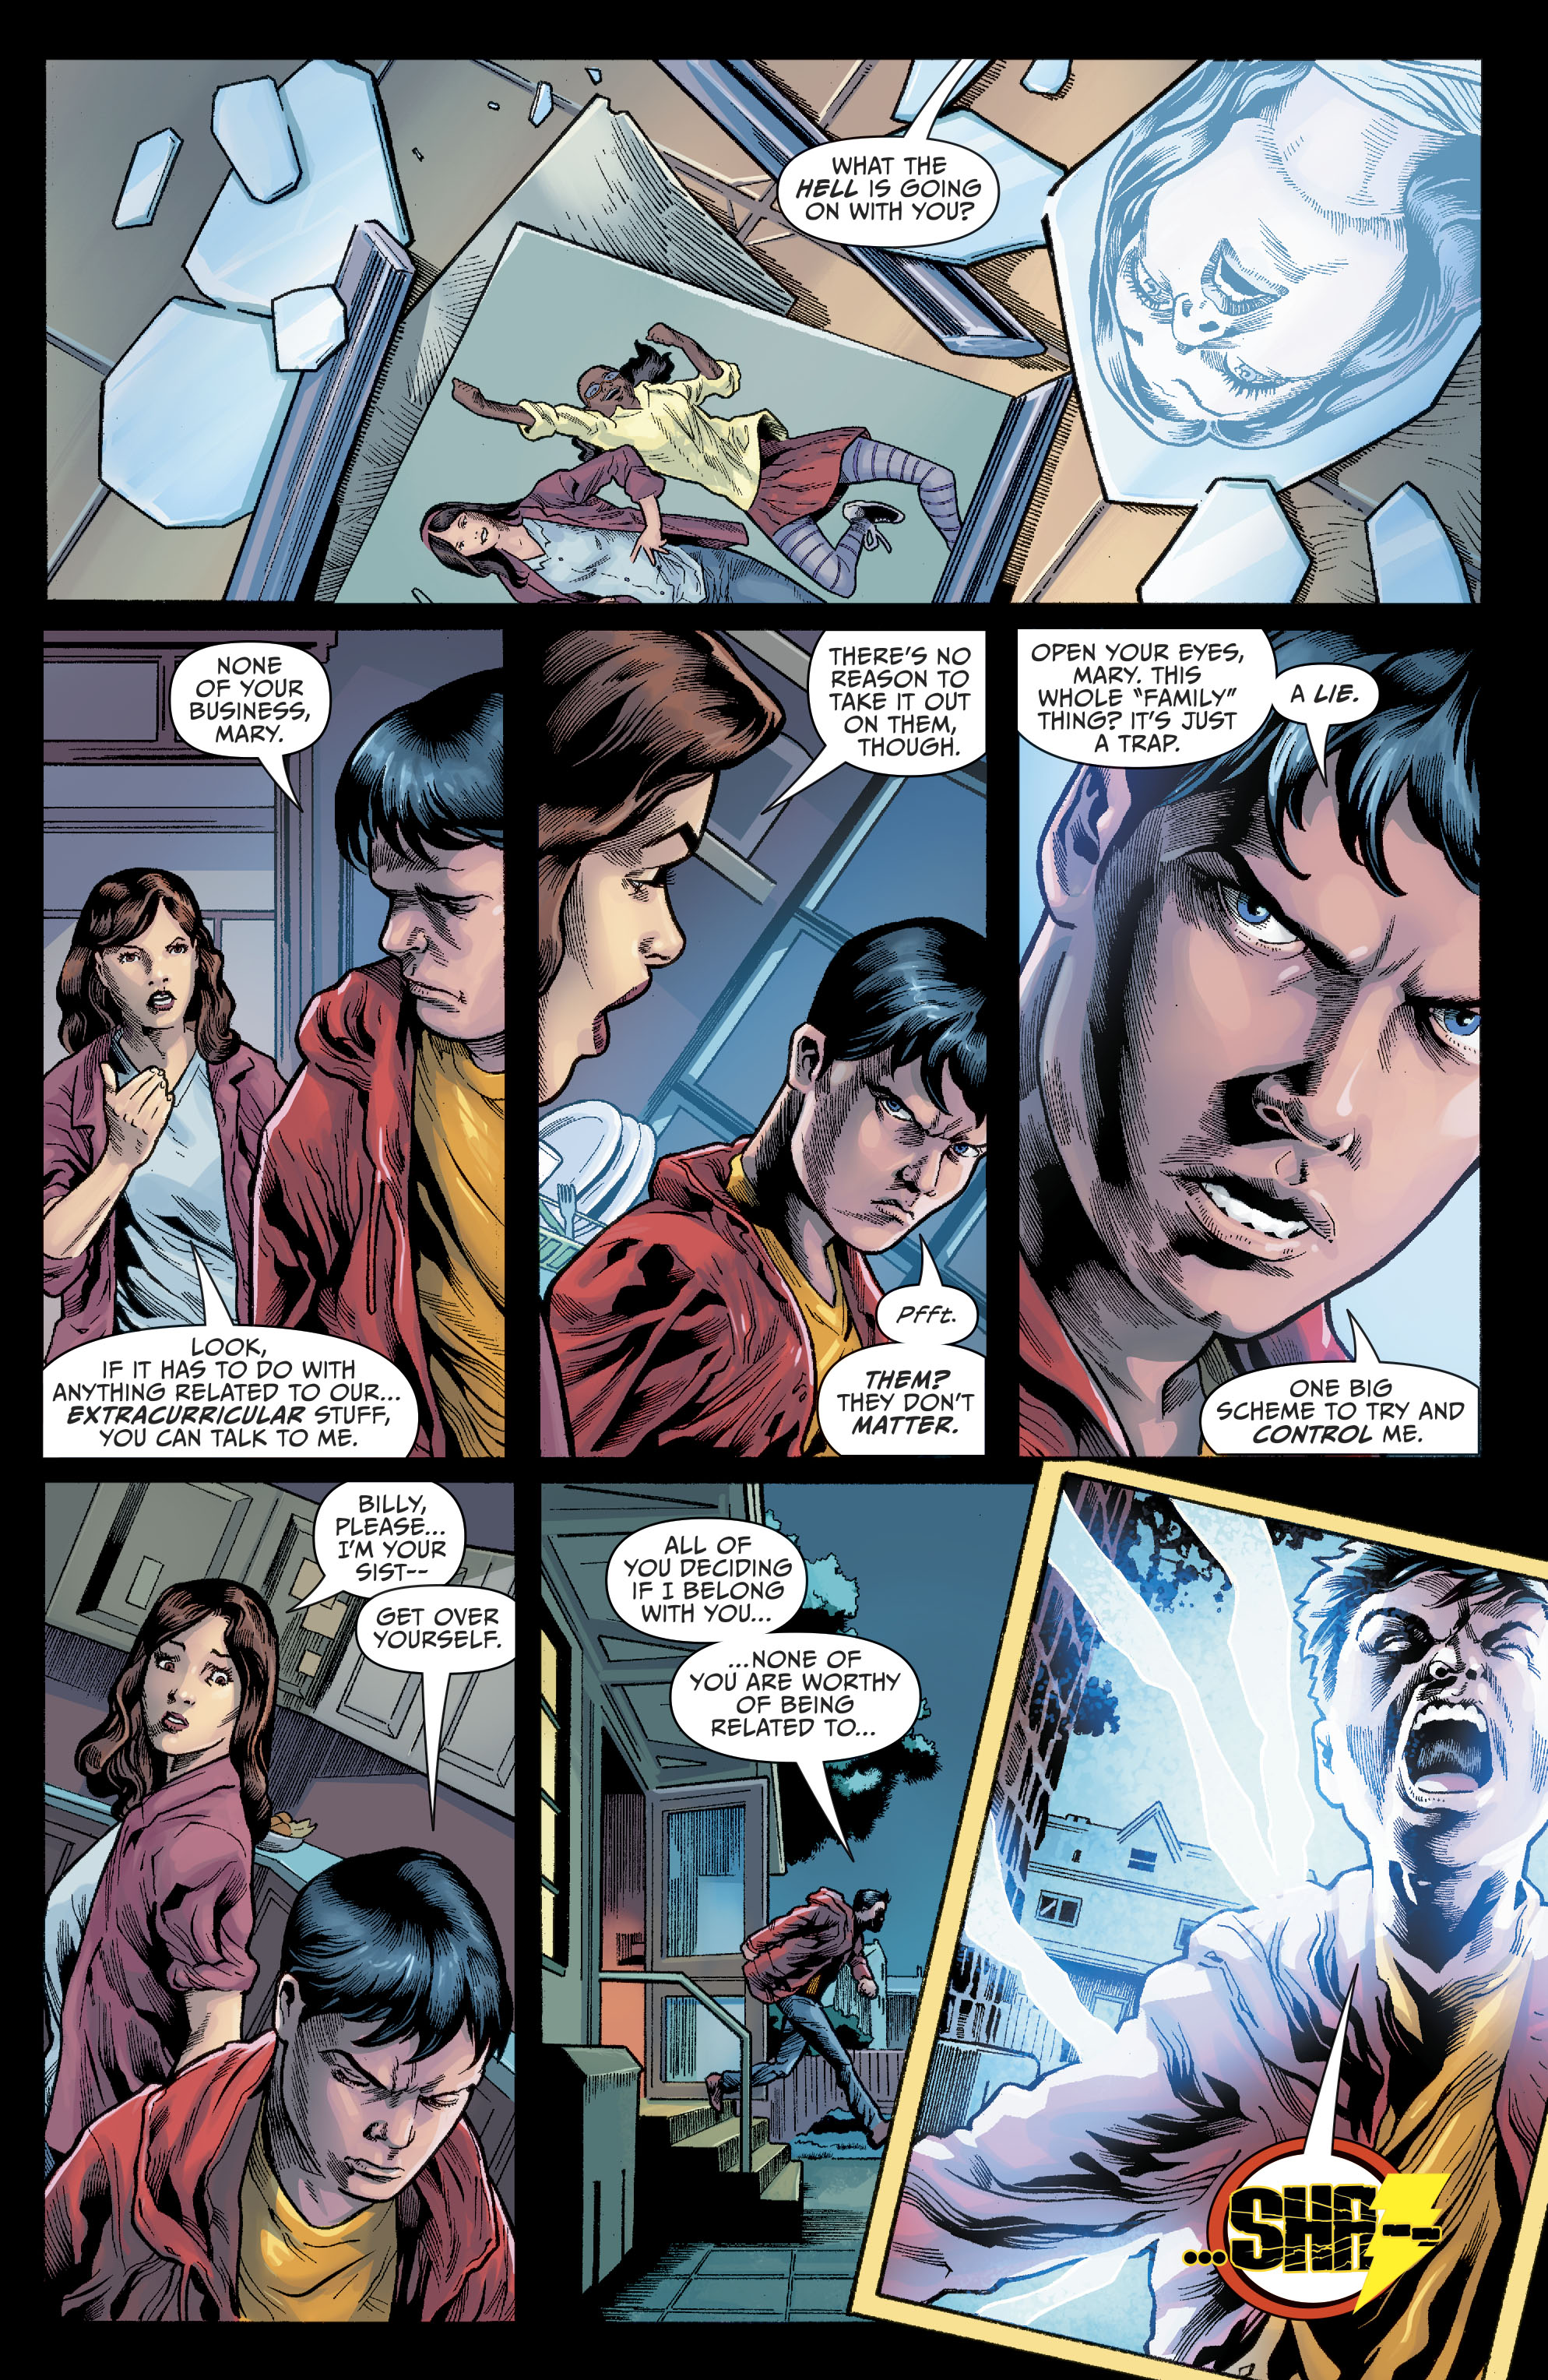 The Infected: King Shazam! (2019-): Chapter 1 - Page 4